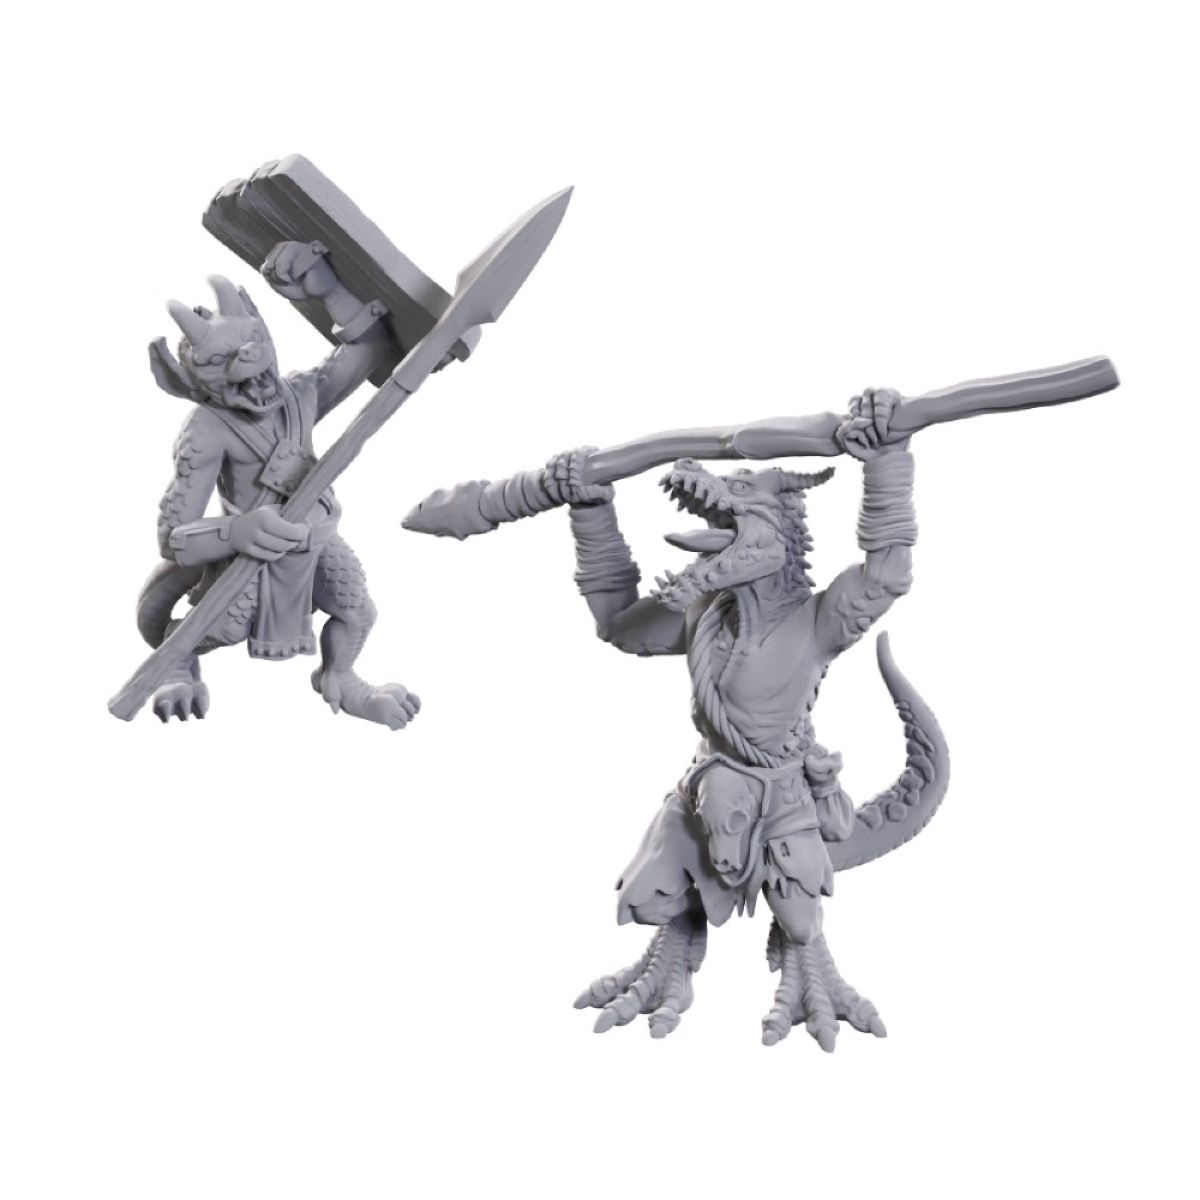 Dungeons &amp; Dragons Nolzurs Marvelous Miniatures: Limited Edition 50th Anniversary - Kobolds